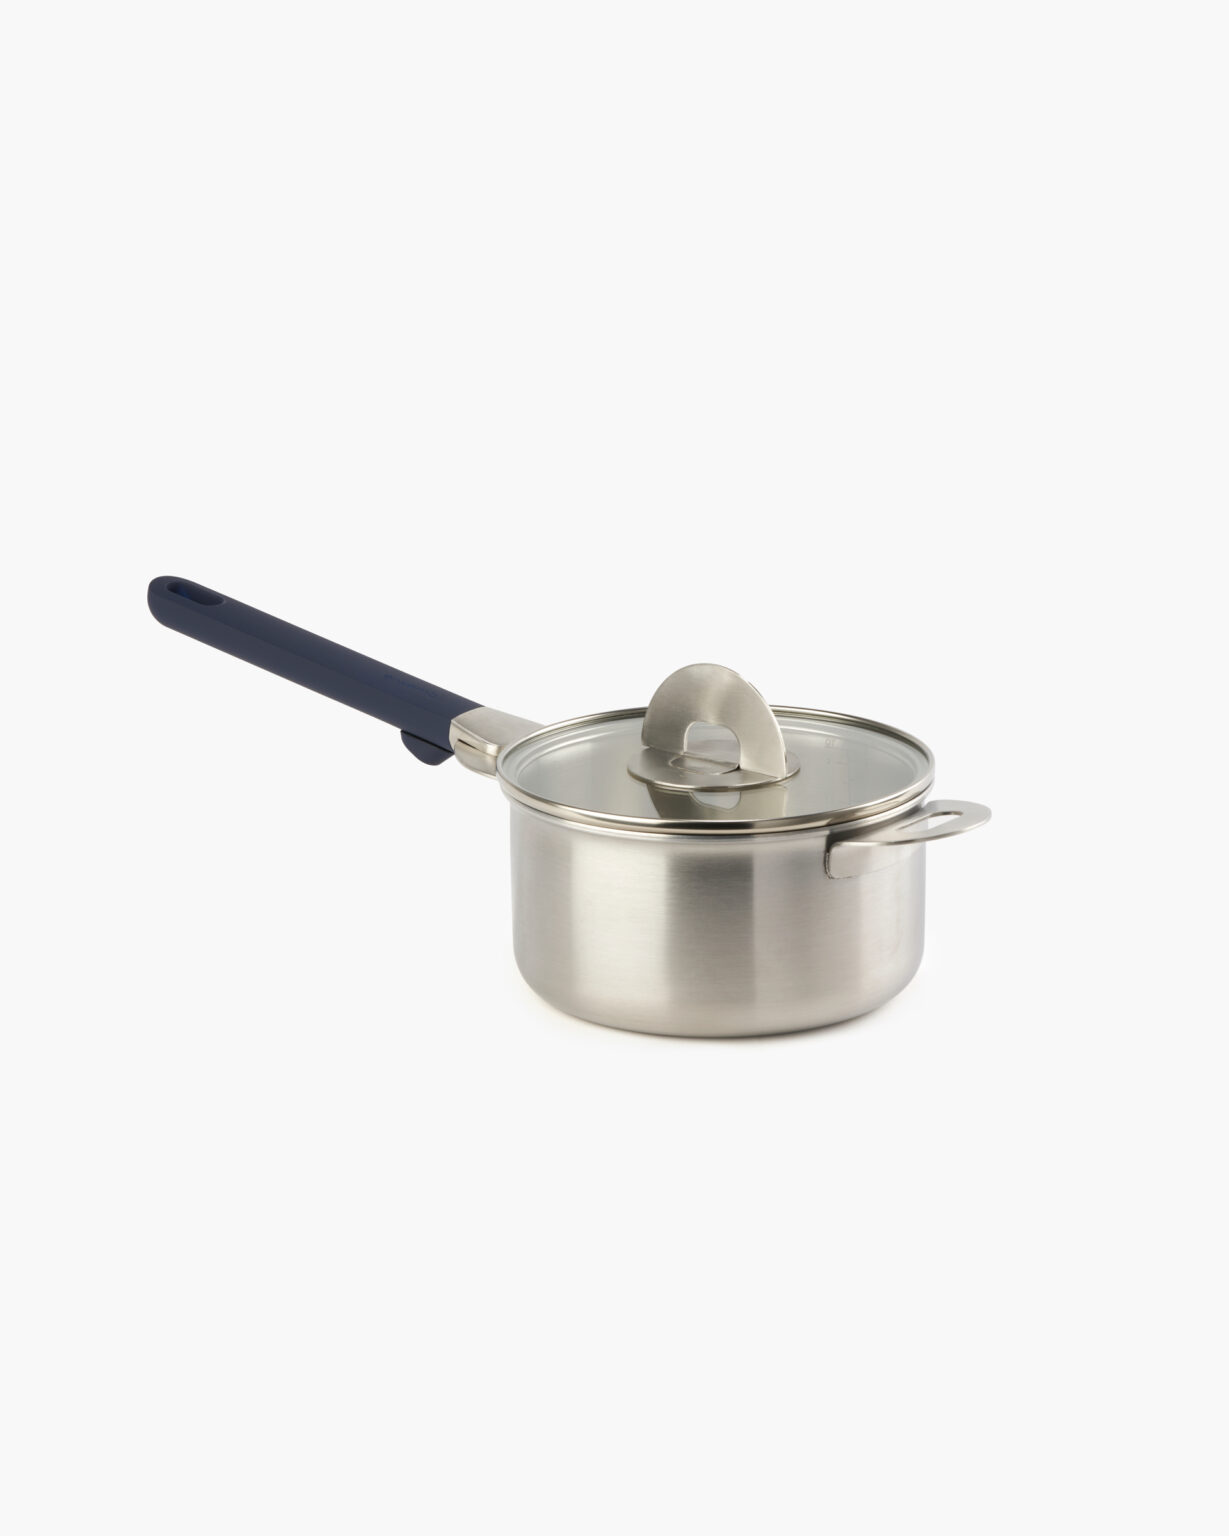 ENSEMBL Stackware Stainless Steel Fully Clad Cookware Small Saucepan